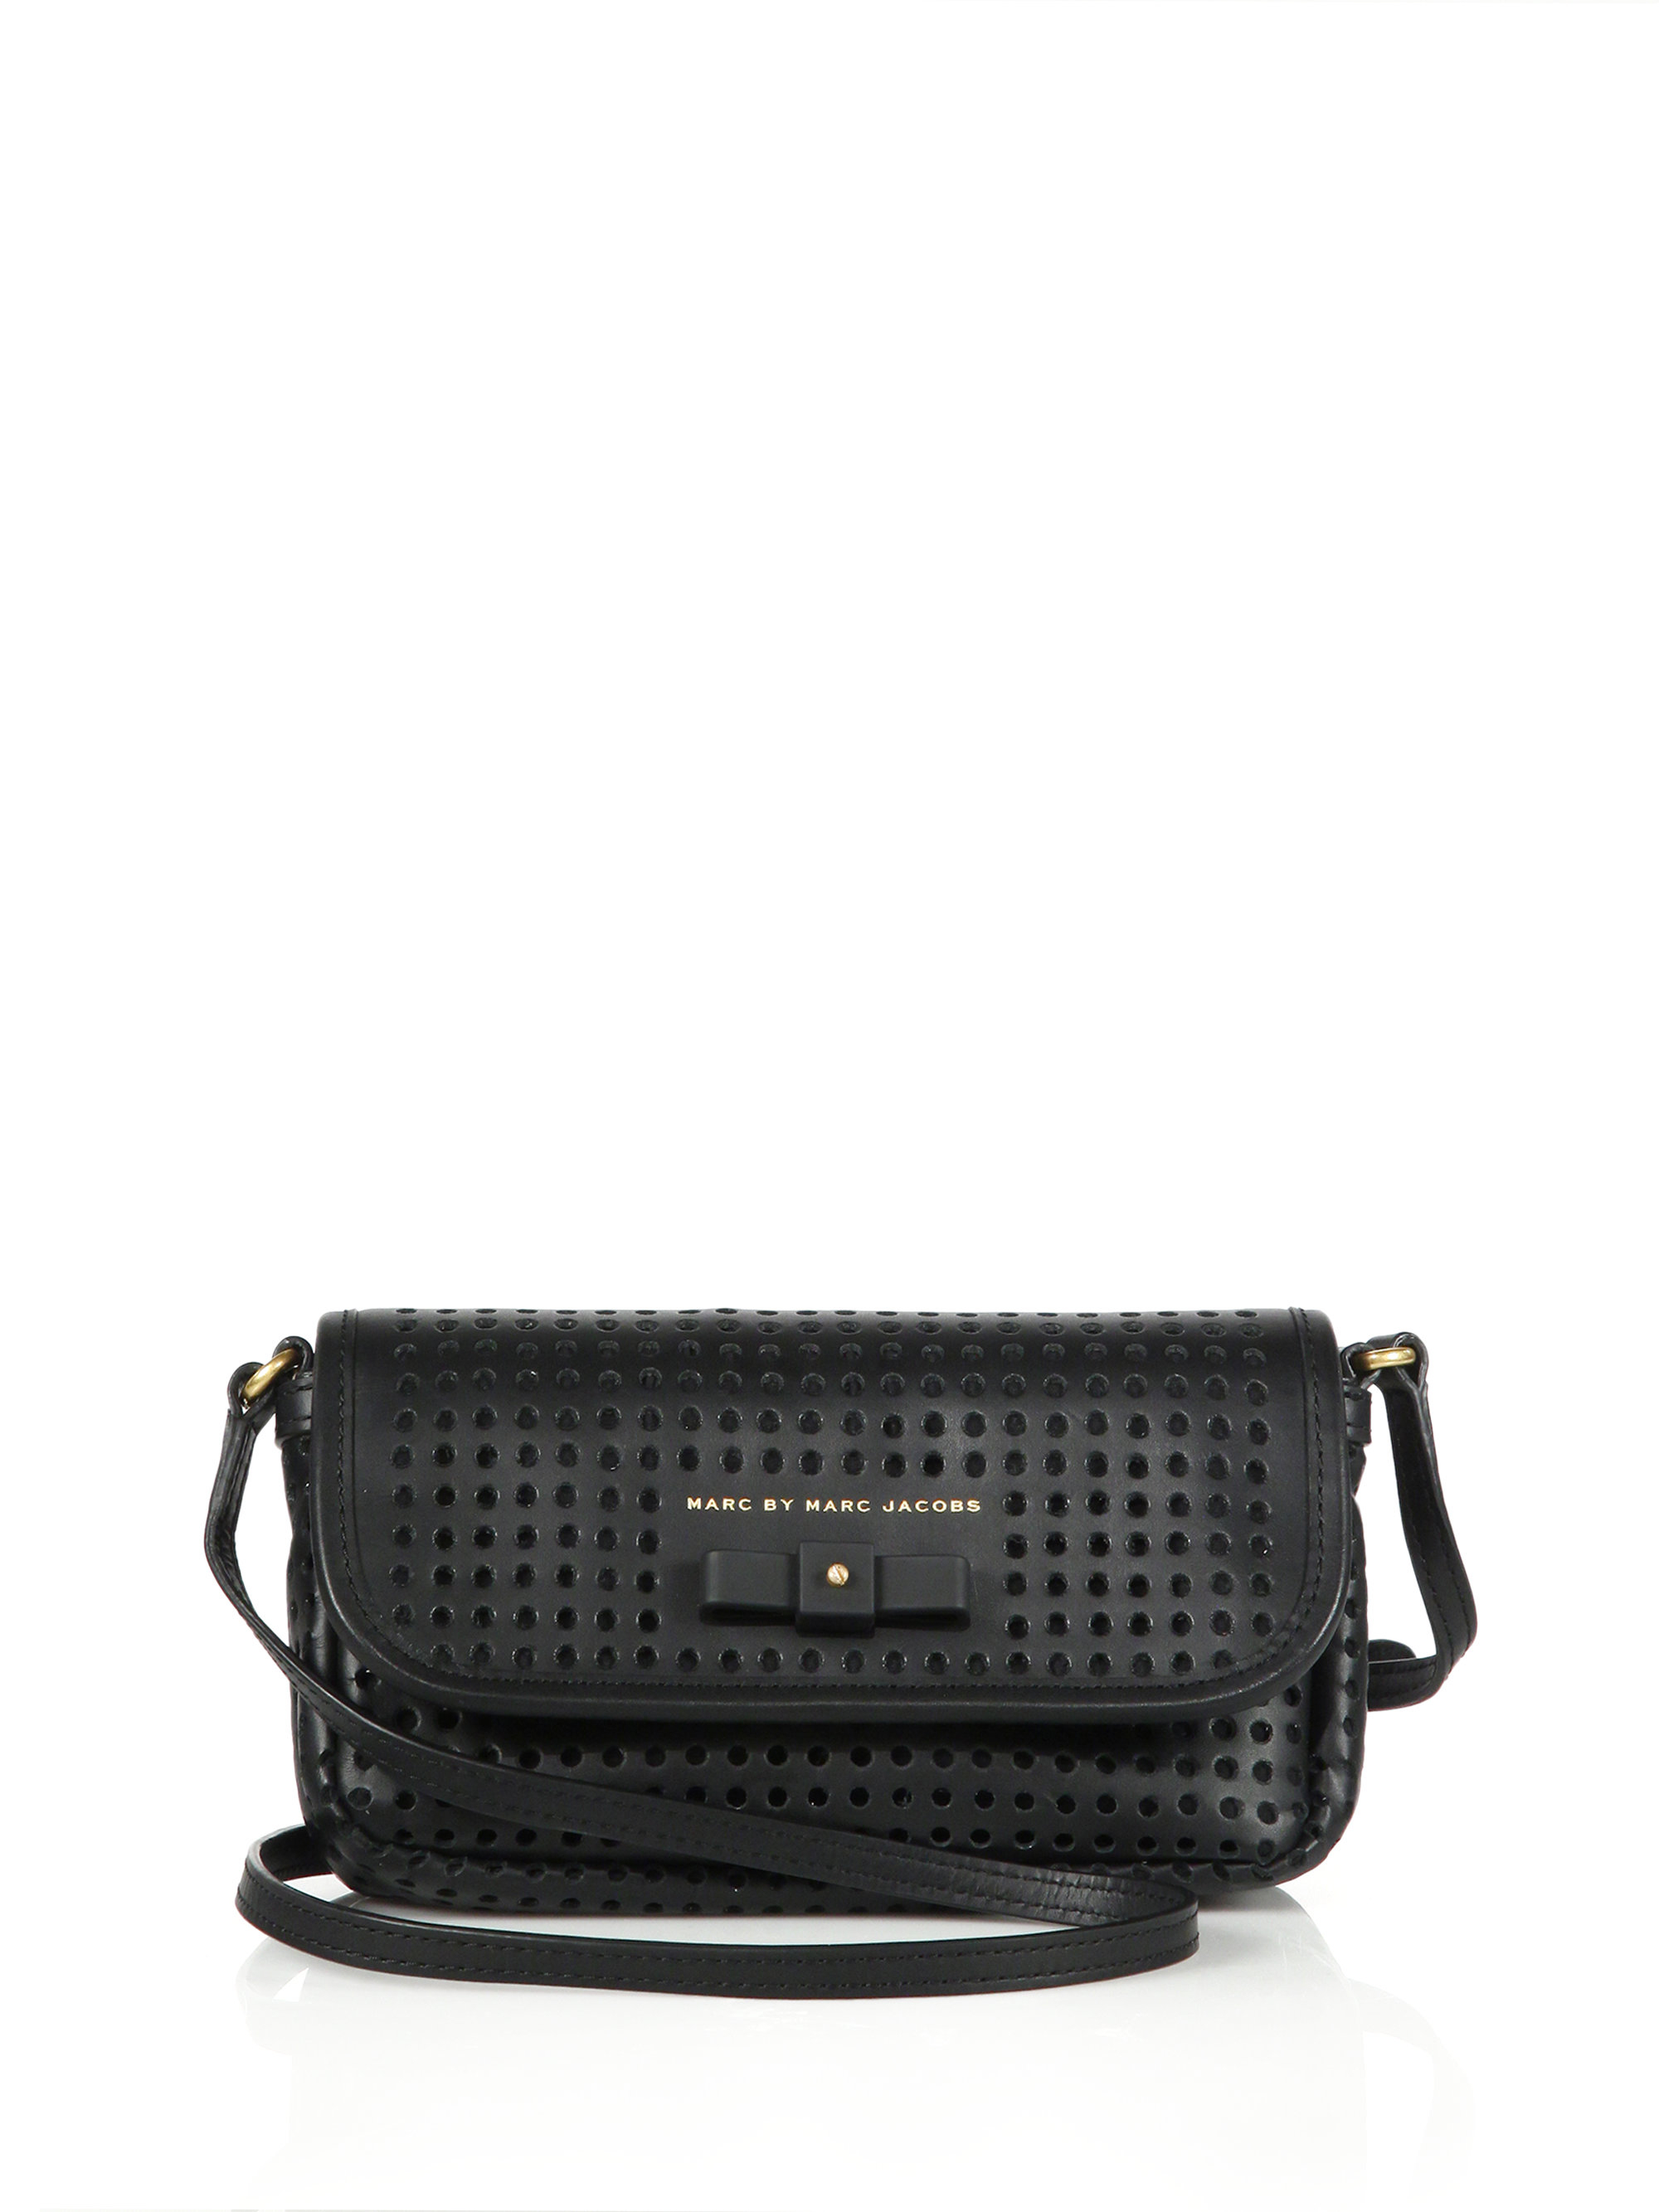 Marc by marc jacobs Sophisticato Monica Bow-Accented Perforated ...